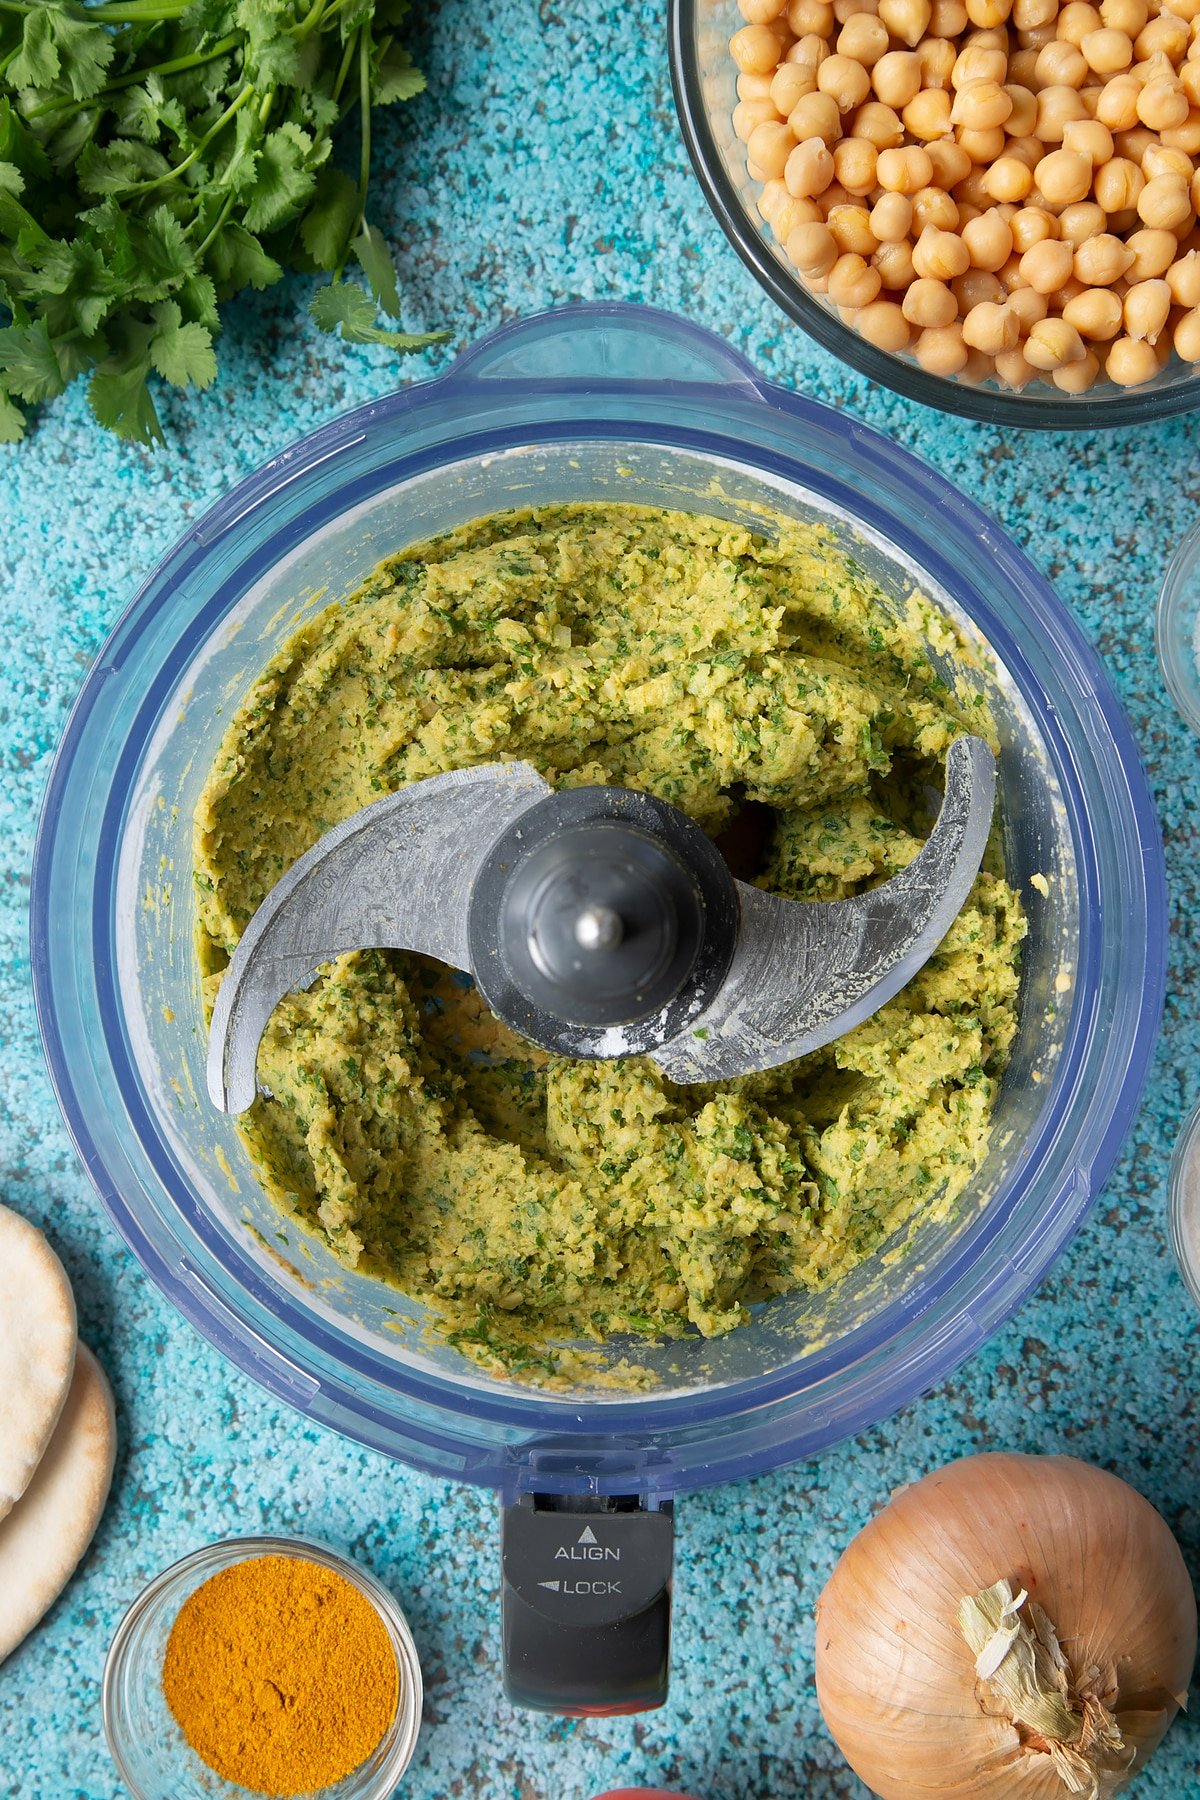 A paste made from chickpeas, coriander, onions, garlic and spices in a food processor bowl. Ingredients to make gluten-free falafel surround the bowl.